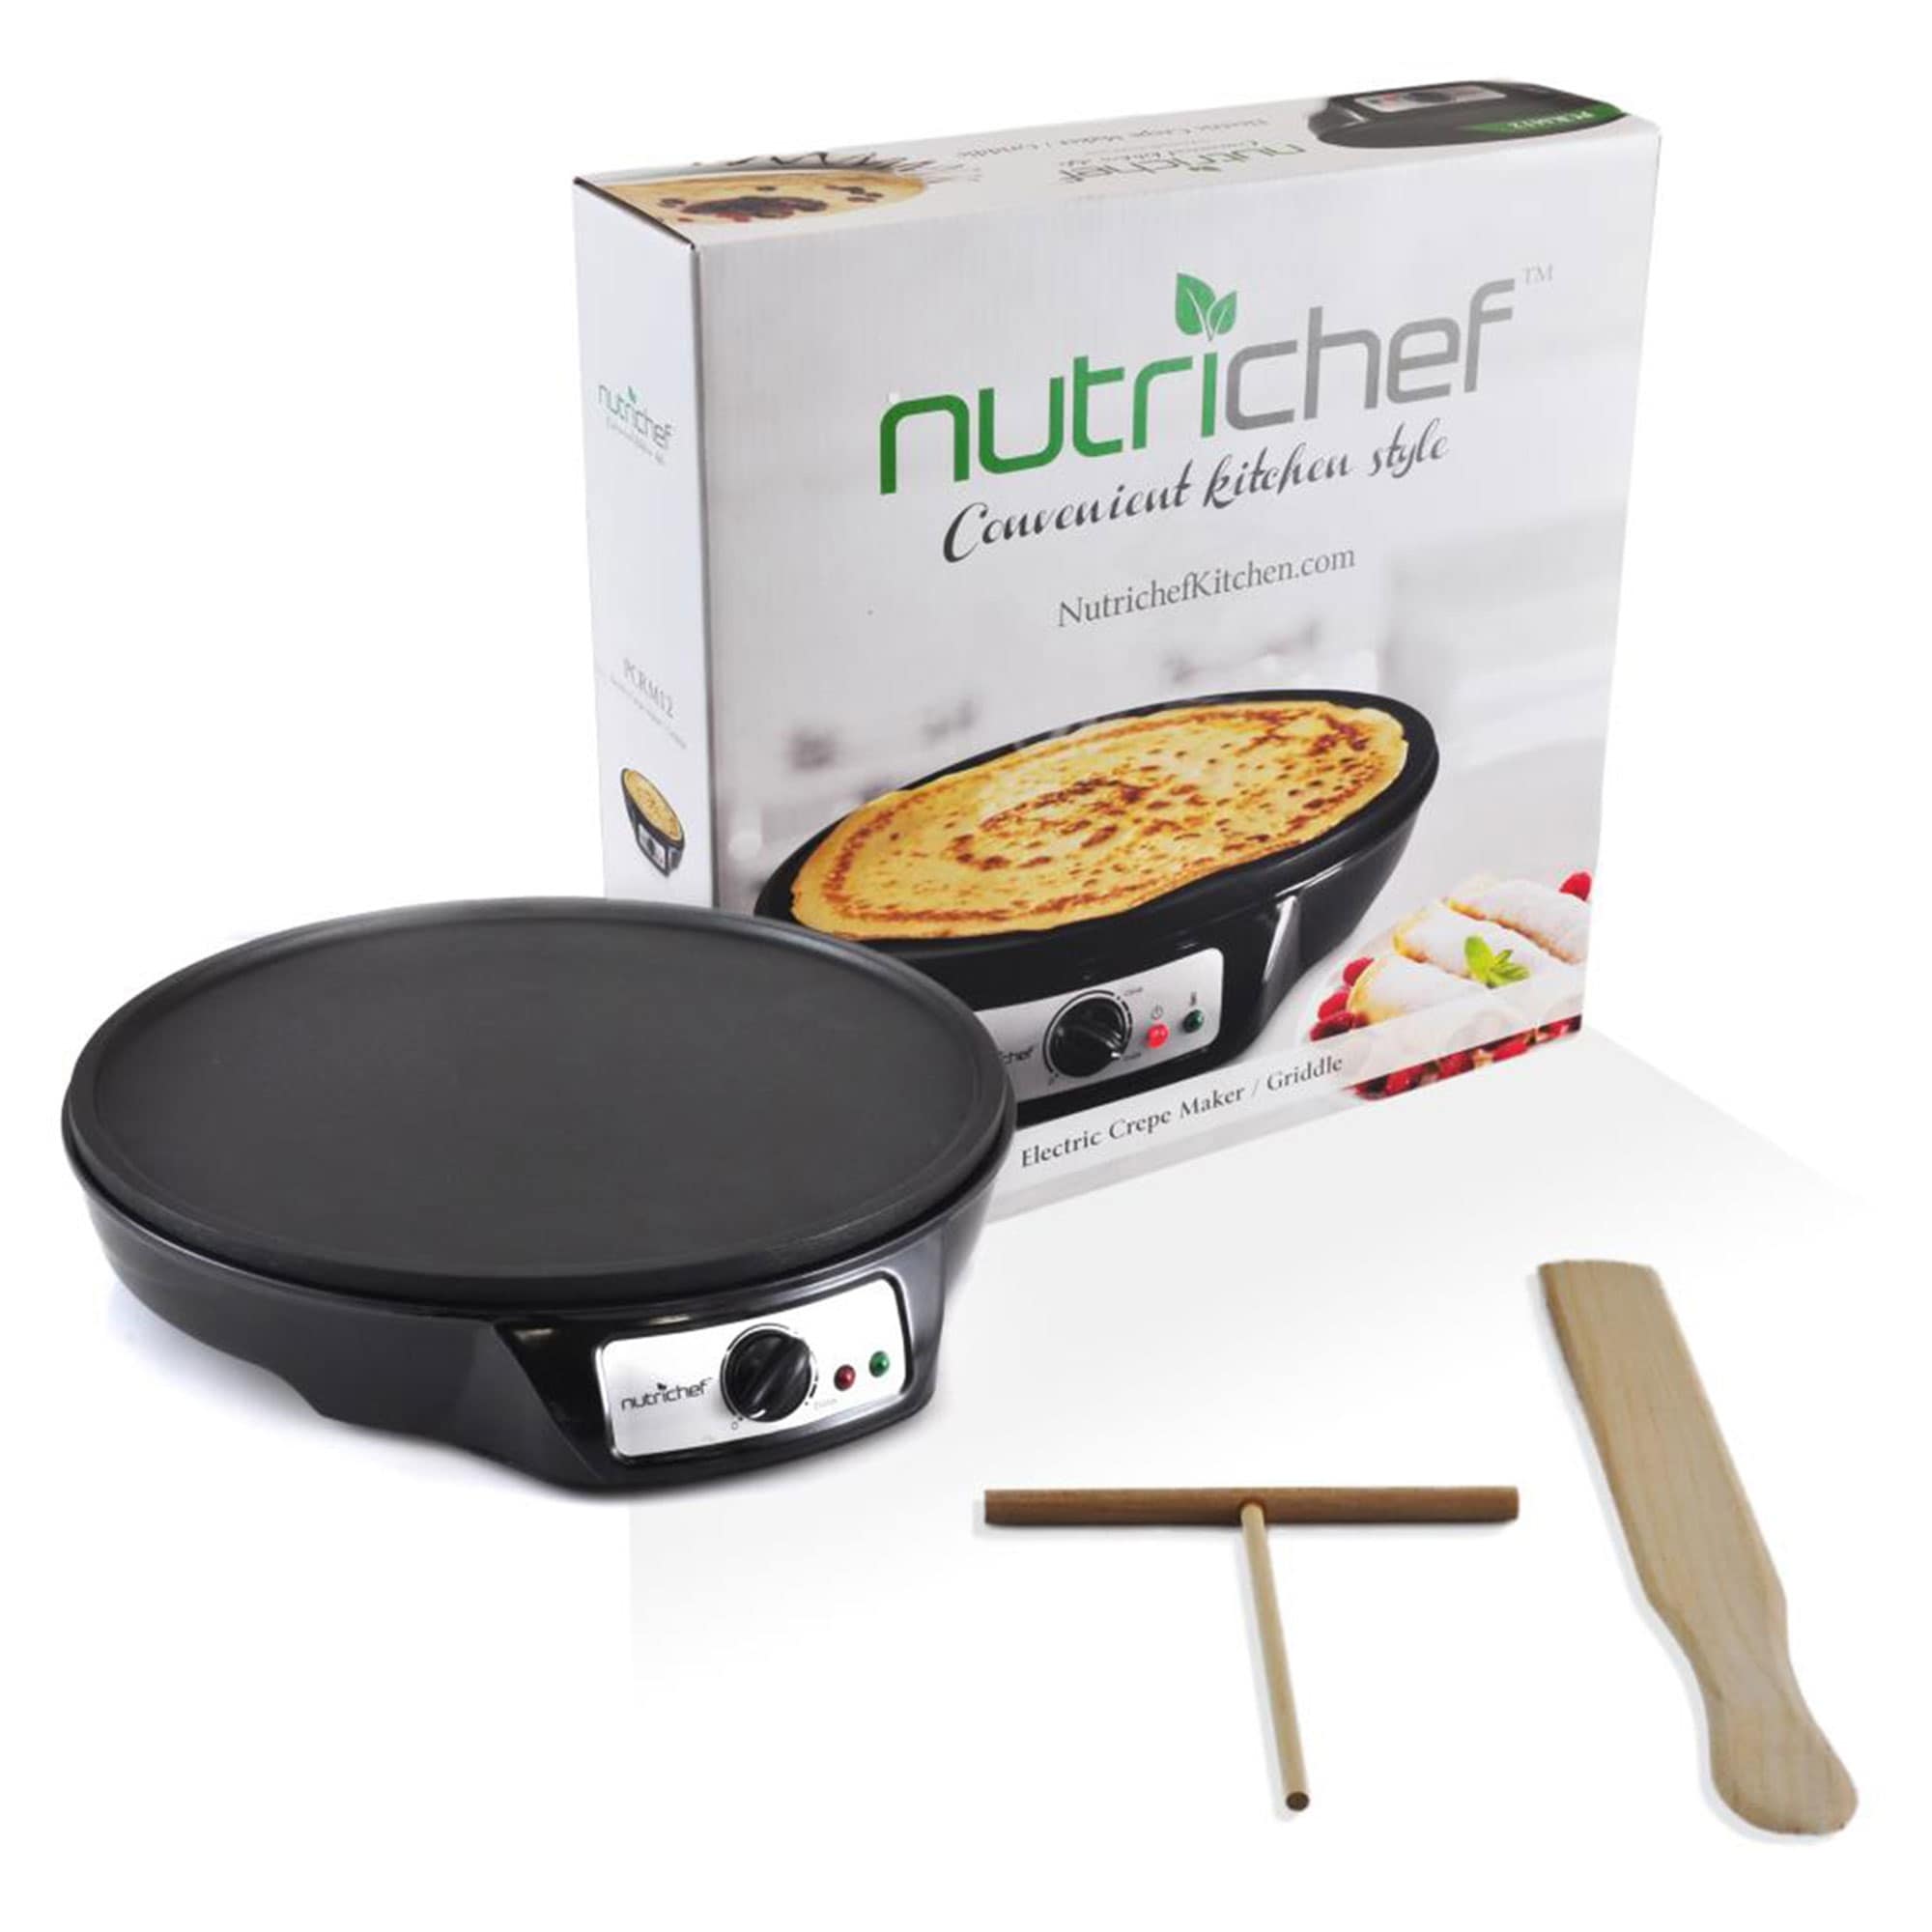 https://ak1.ostkcdn.com/images/products/is/images/direct/abc7cc6dc1d970e4cc99ee84f4b3024cd18df126/NutriChef-Electric-Nonstick-Griddle-Crepe-Injera-Maker-Hot-Plate-Cooktop%2C-Black.jpg